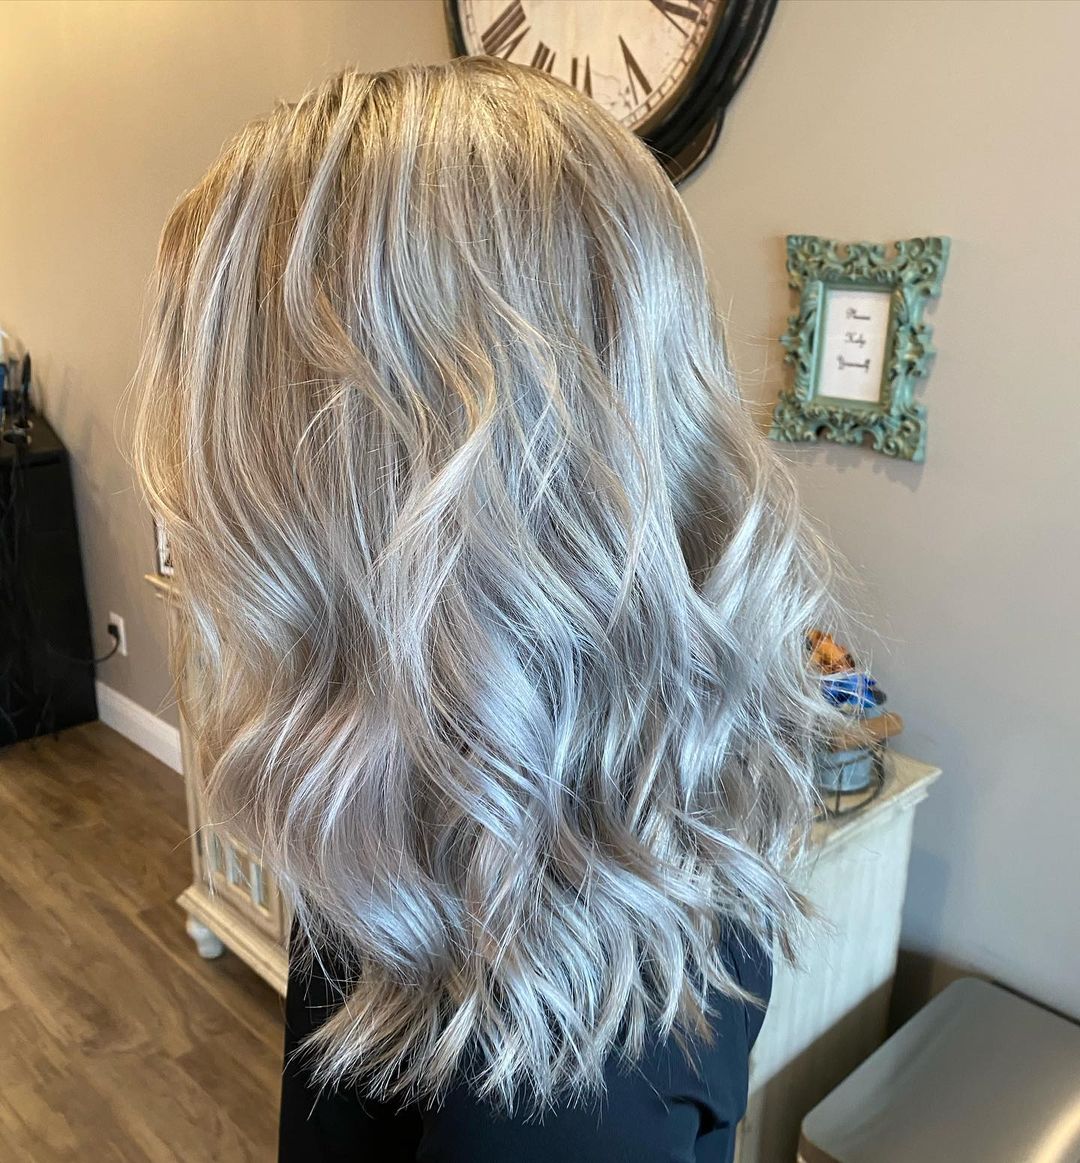 Metallic Silver and Blonde hair color